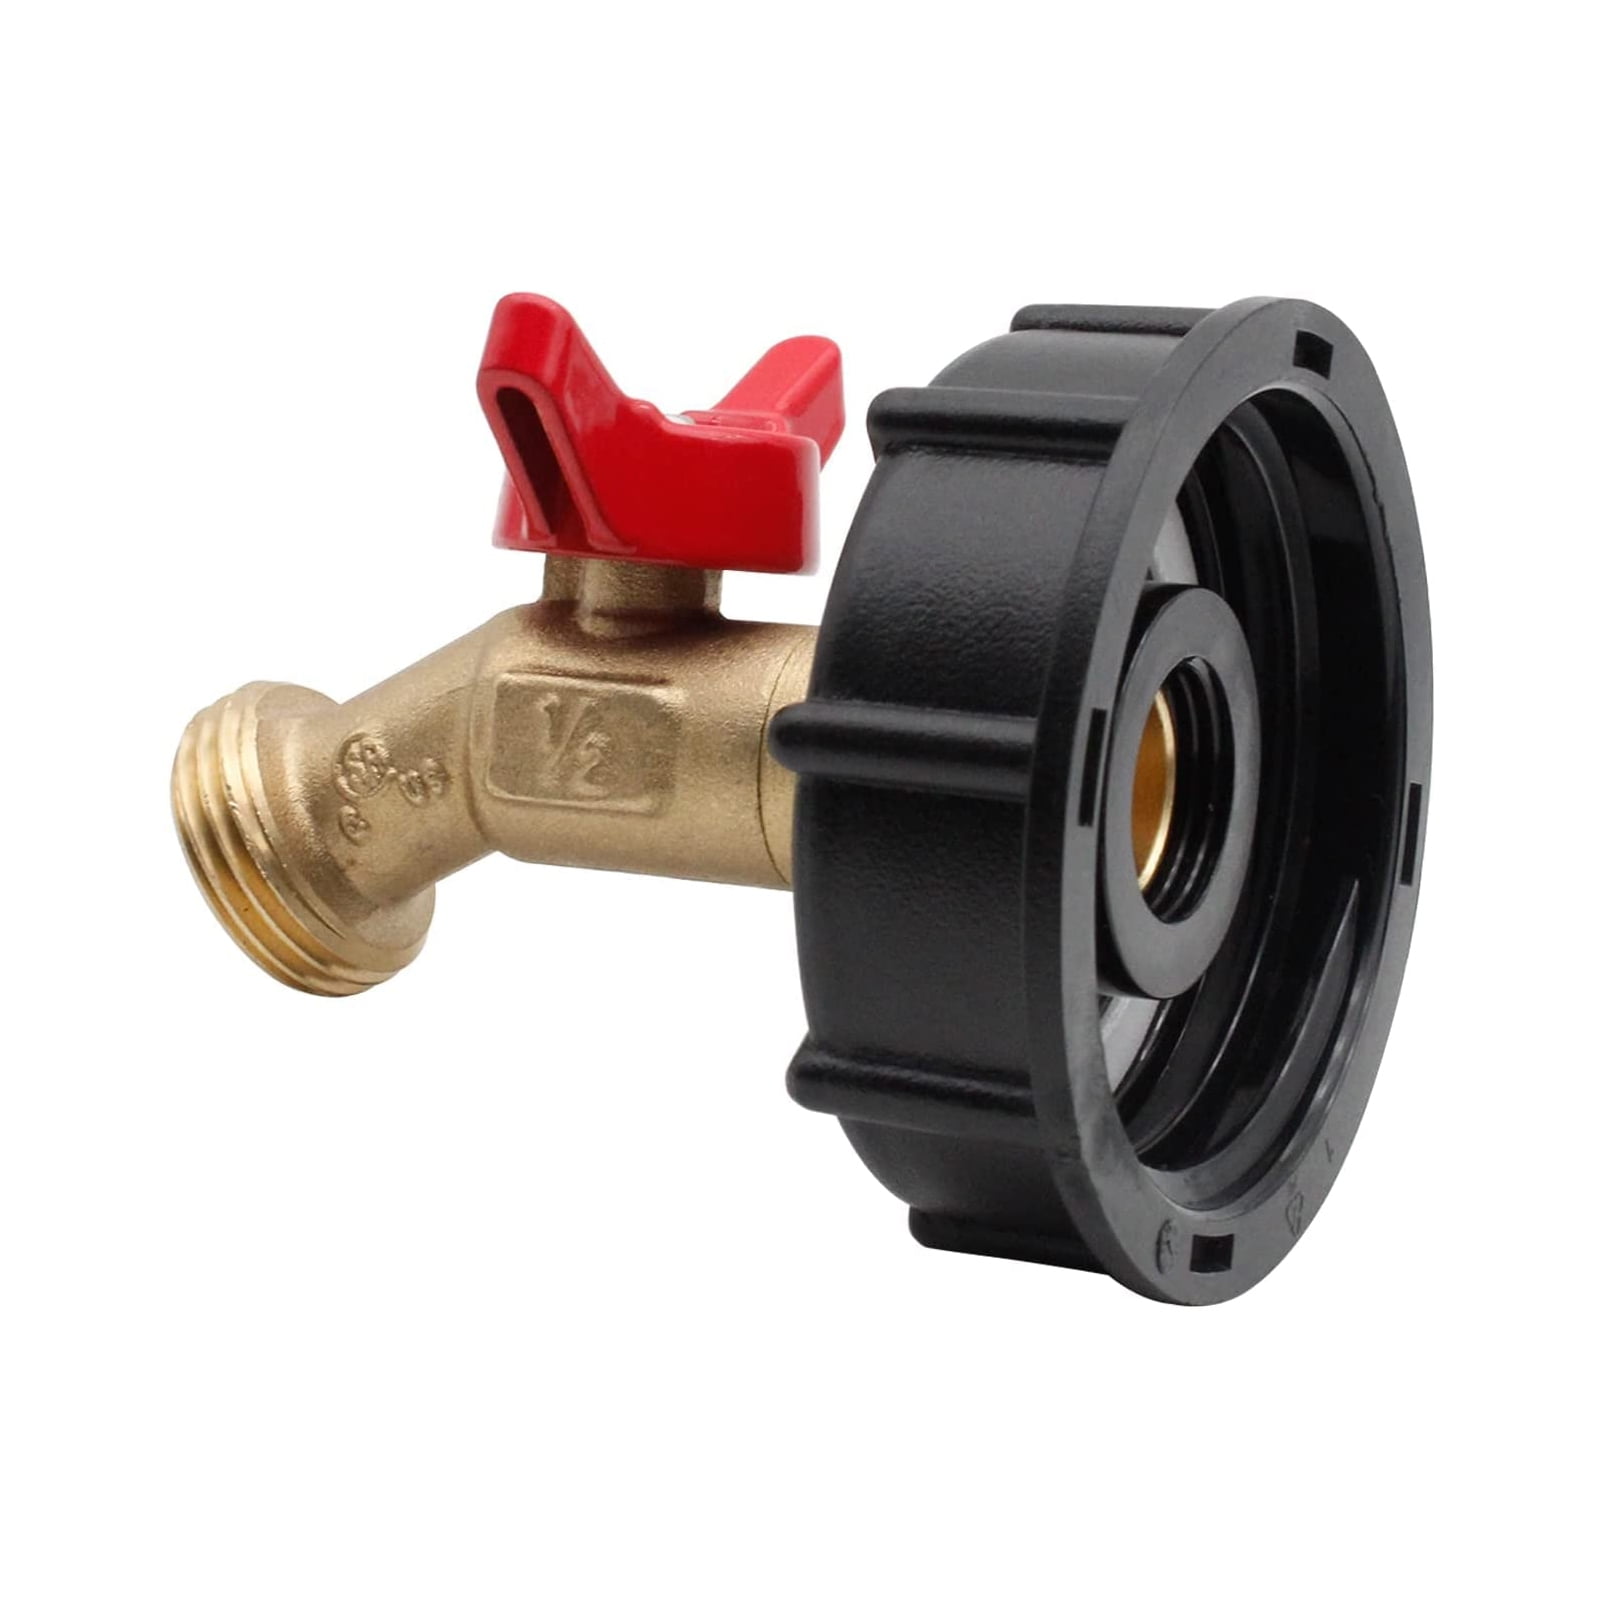 IBC Tank Hose Fitting Adapter With 3/4 Brass Faucet Valve Switch Connector , 